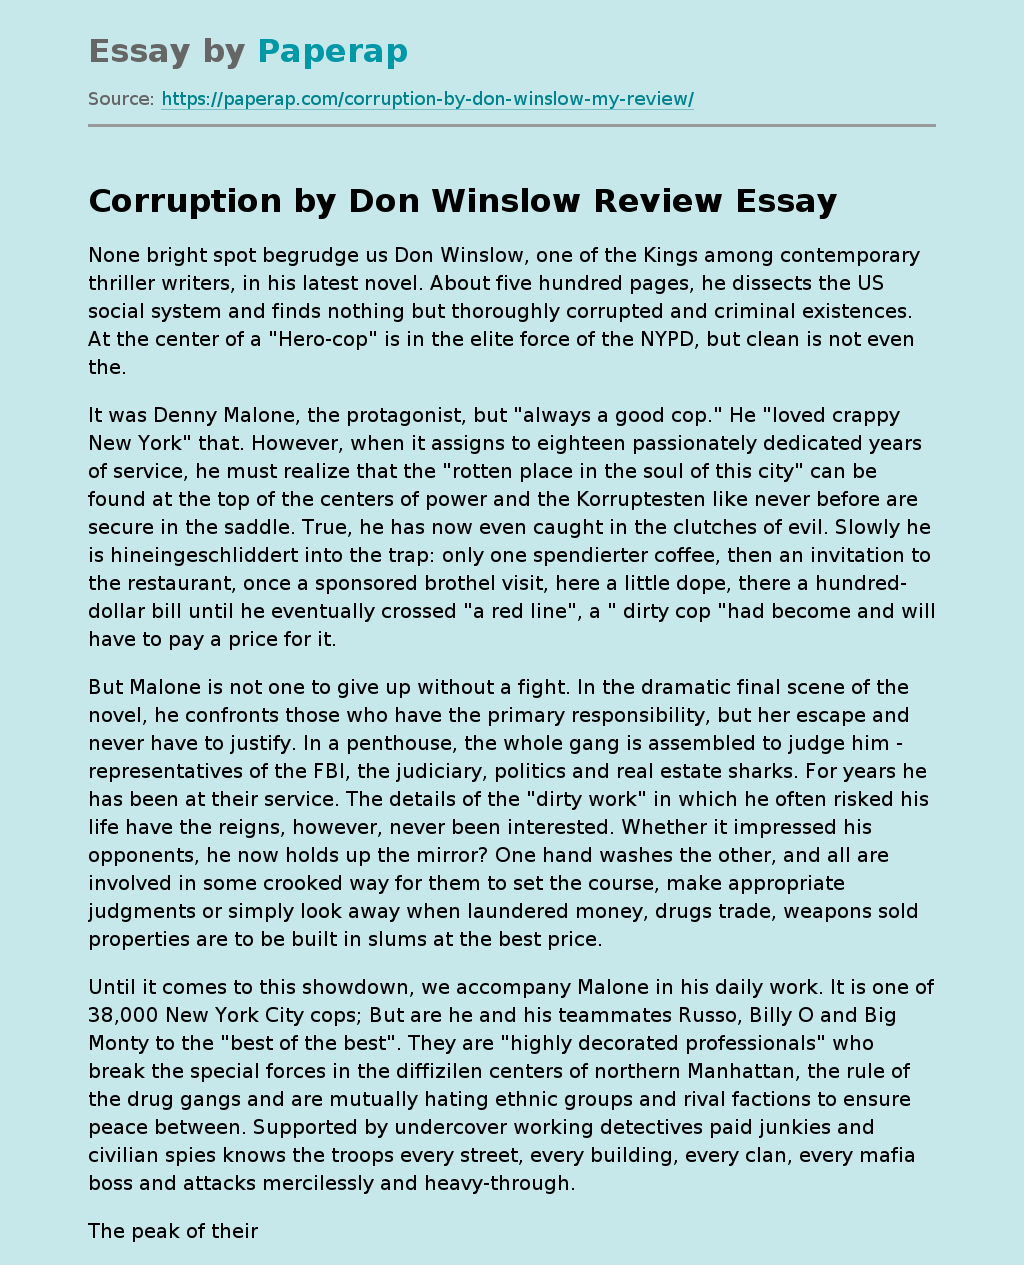 Corruption by Don Winslow Review